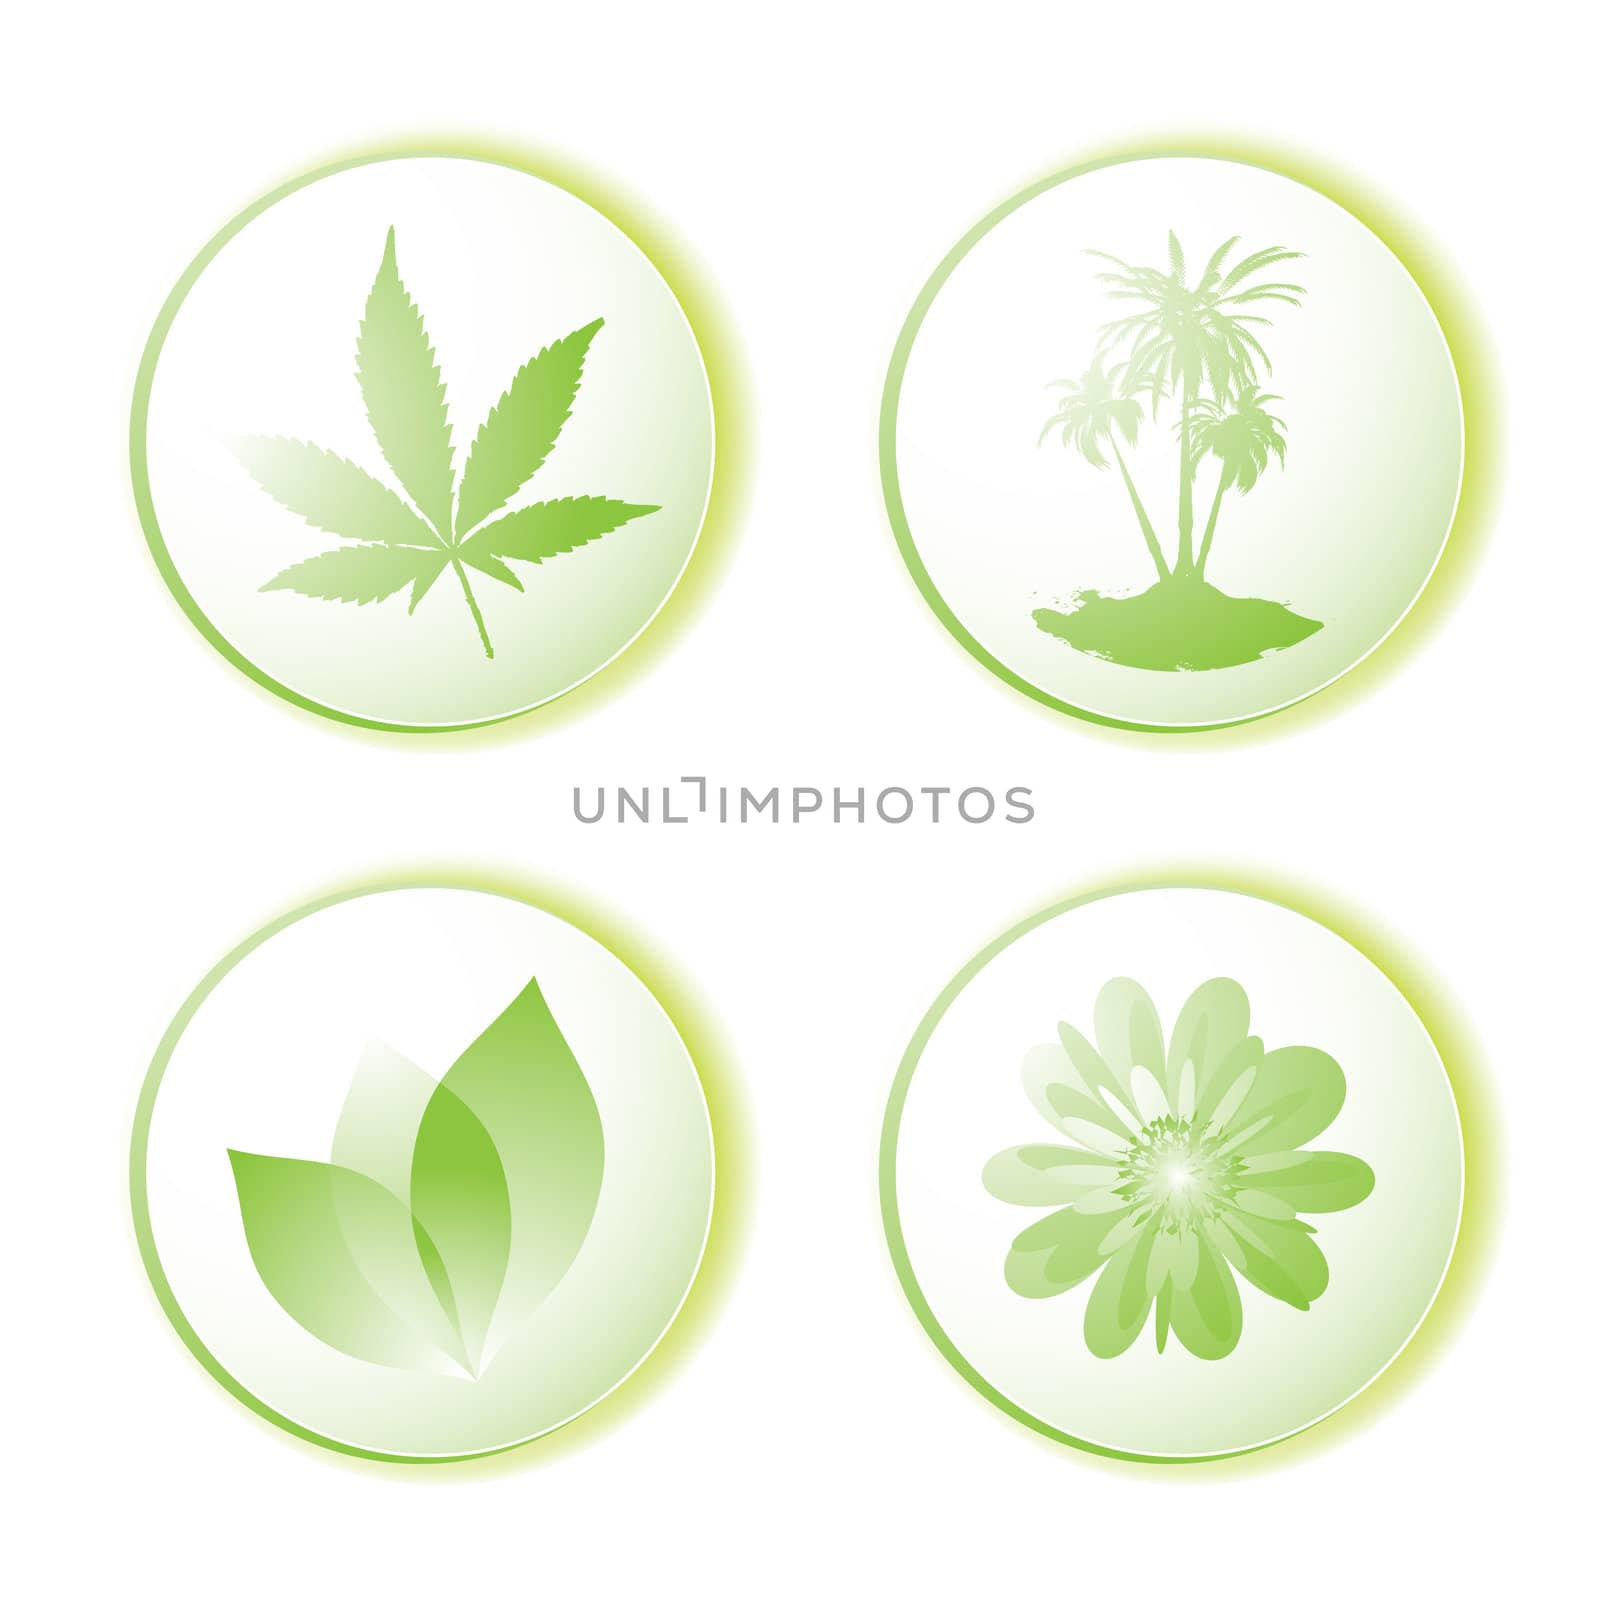 Green or eco icon set with leaf and palm tree illustrated design